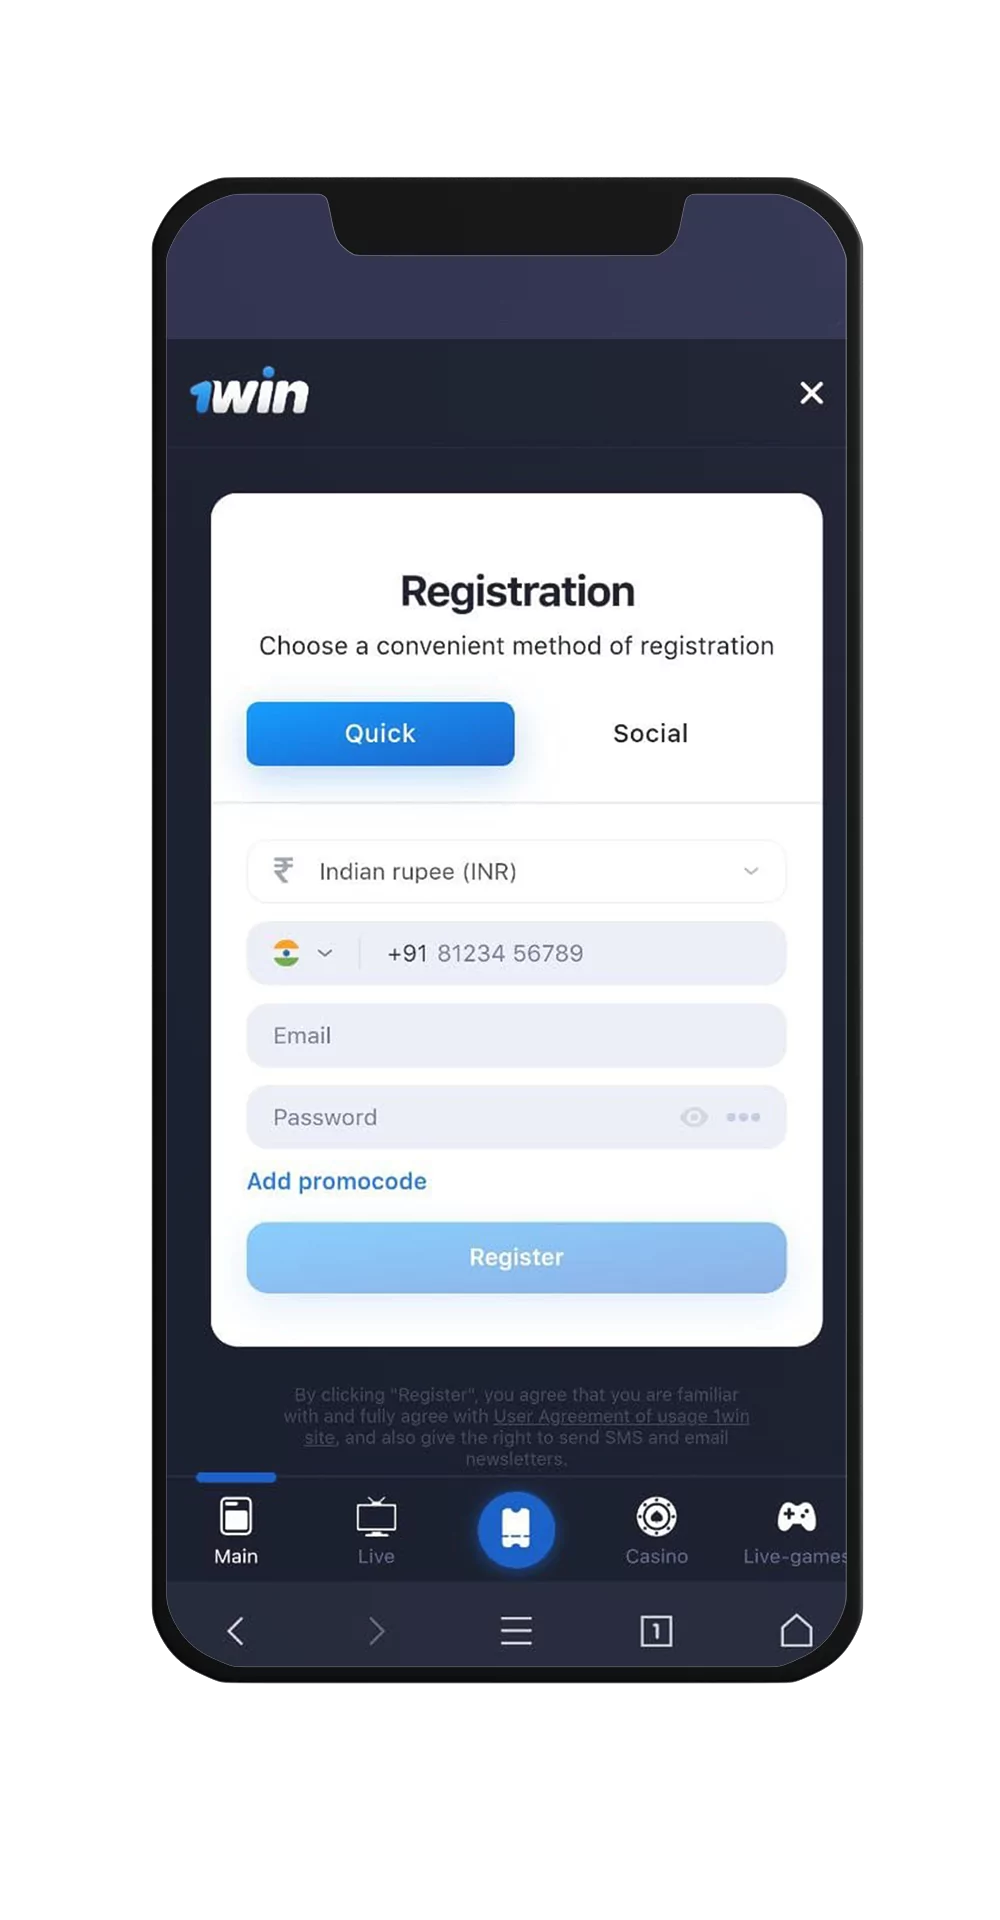 Threre are two methods for registration at 1win.